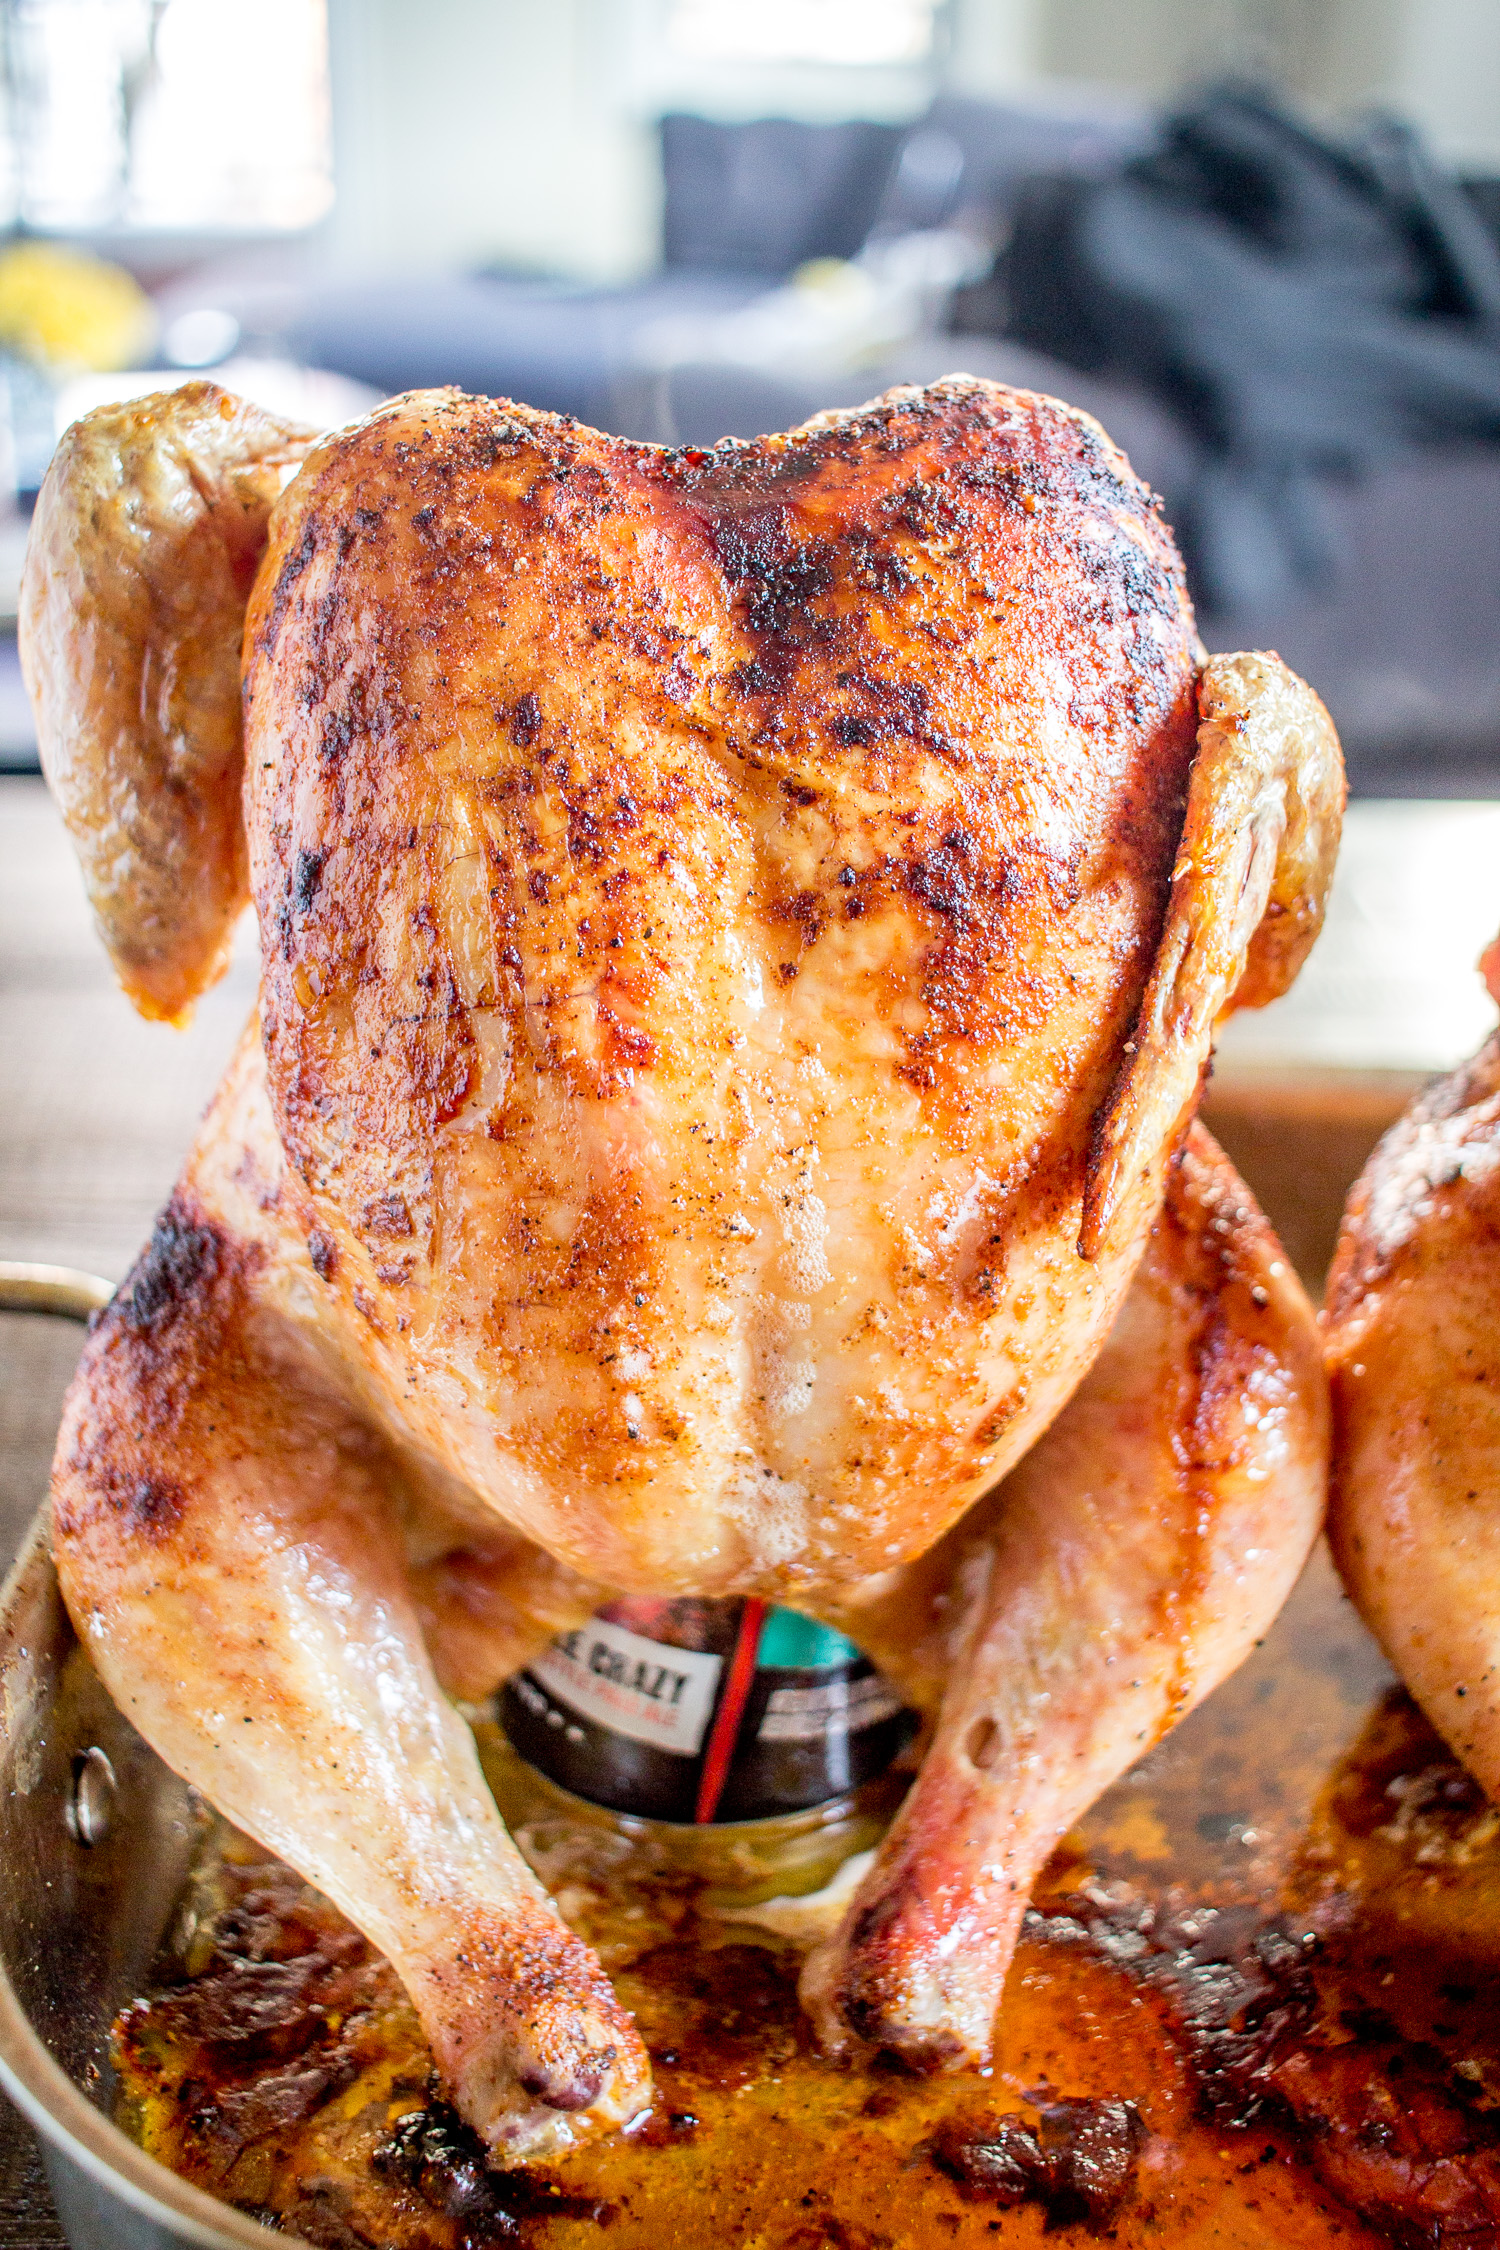 How to Make Beer Can Chicken - The Easiest Beer Can Chicken Recipe.